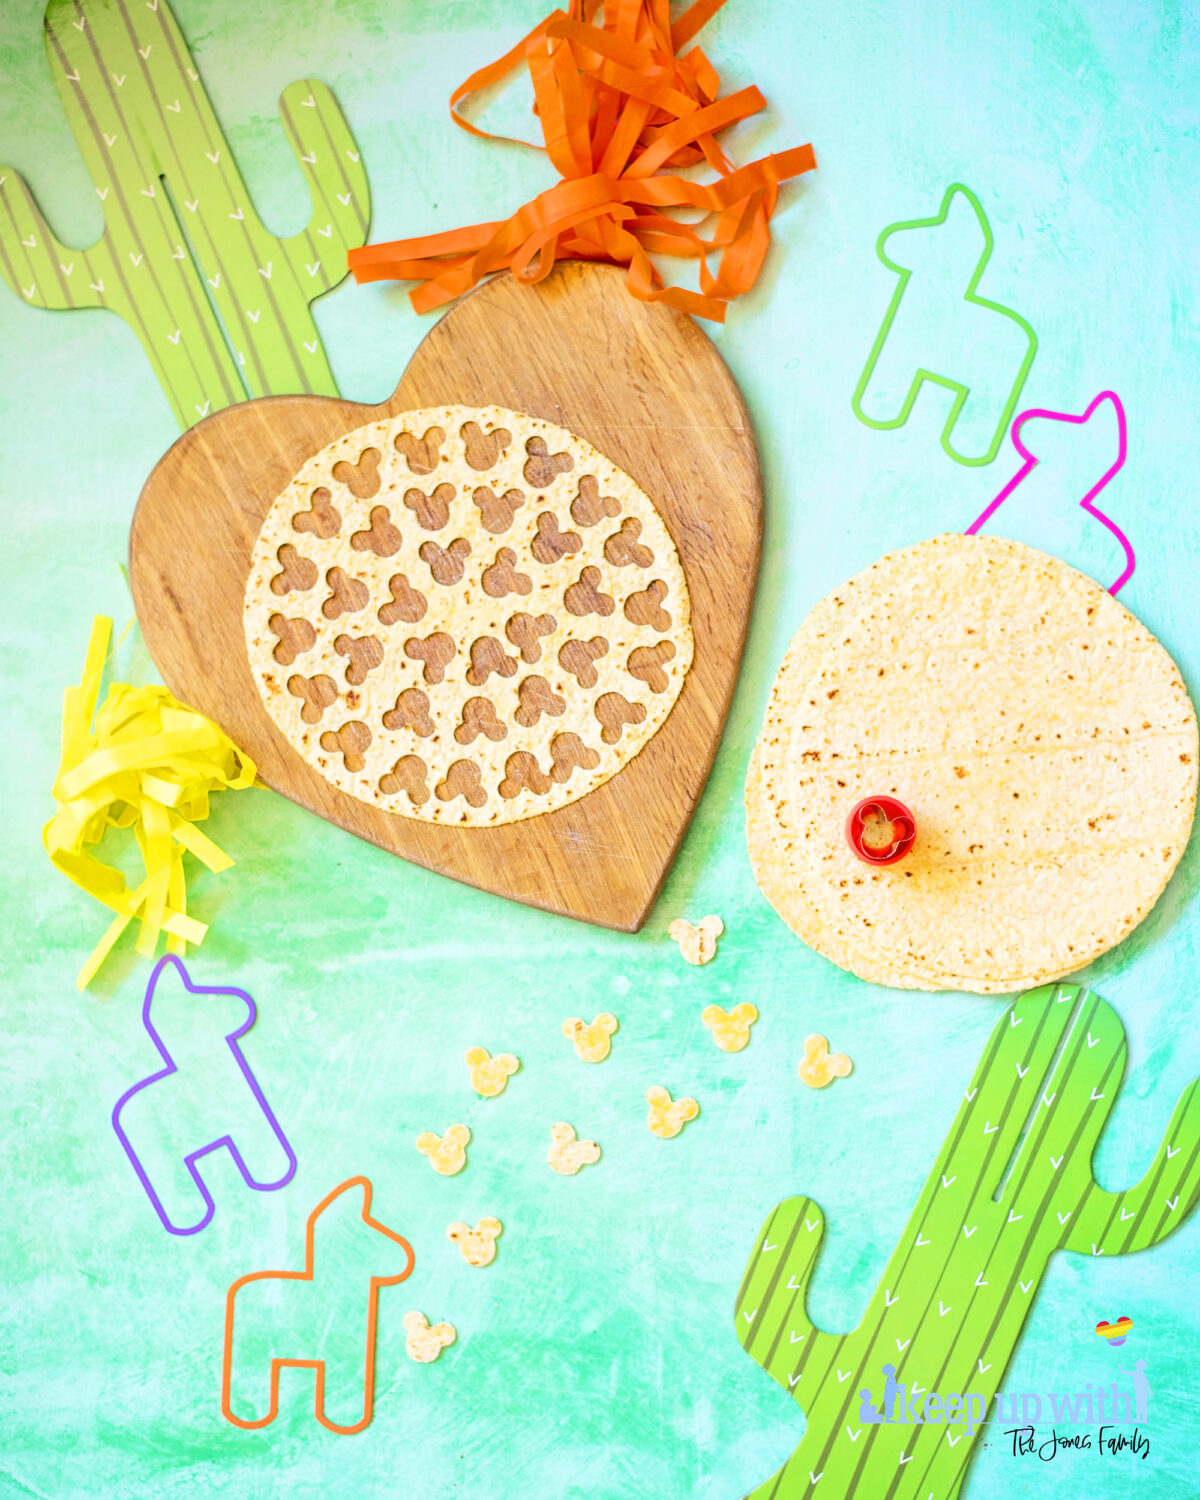 Image shows how to cut nacho chips from a tortilla. There are colourful llama cut outs and cardboard cacti, and a tortilla wrap which has been cut into little Mickey Mouse shaped pieces.  Keep up with the jones family